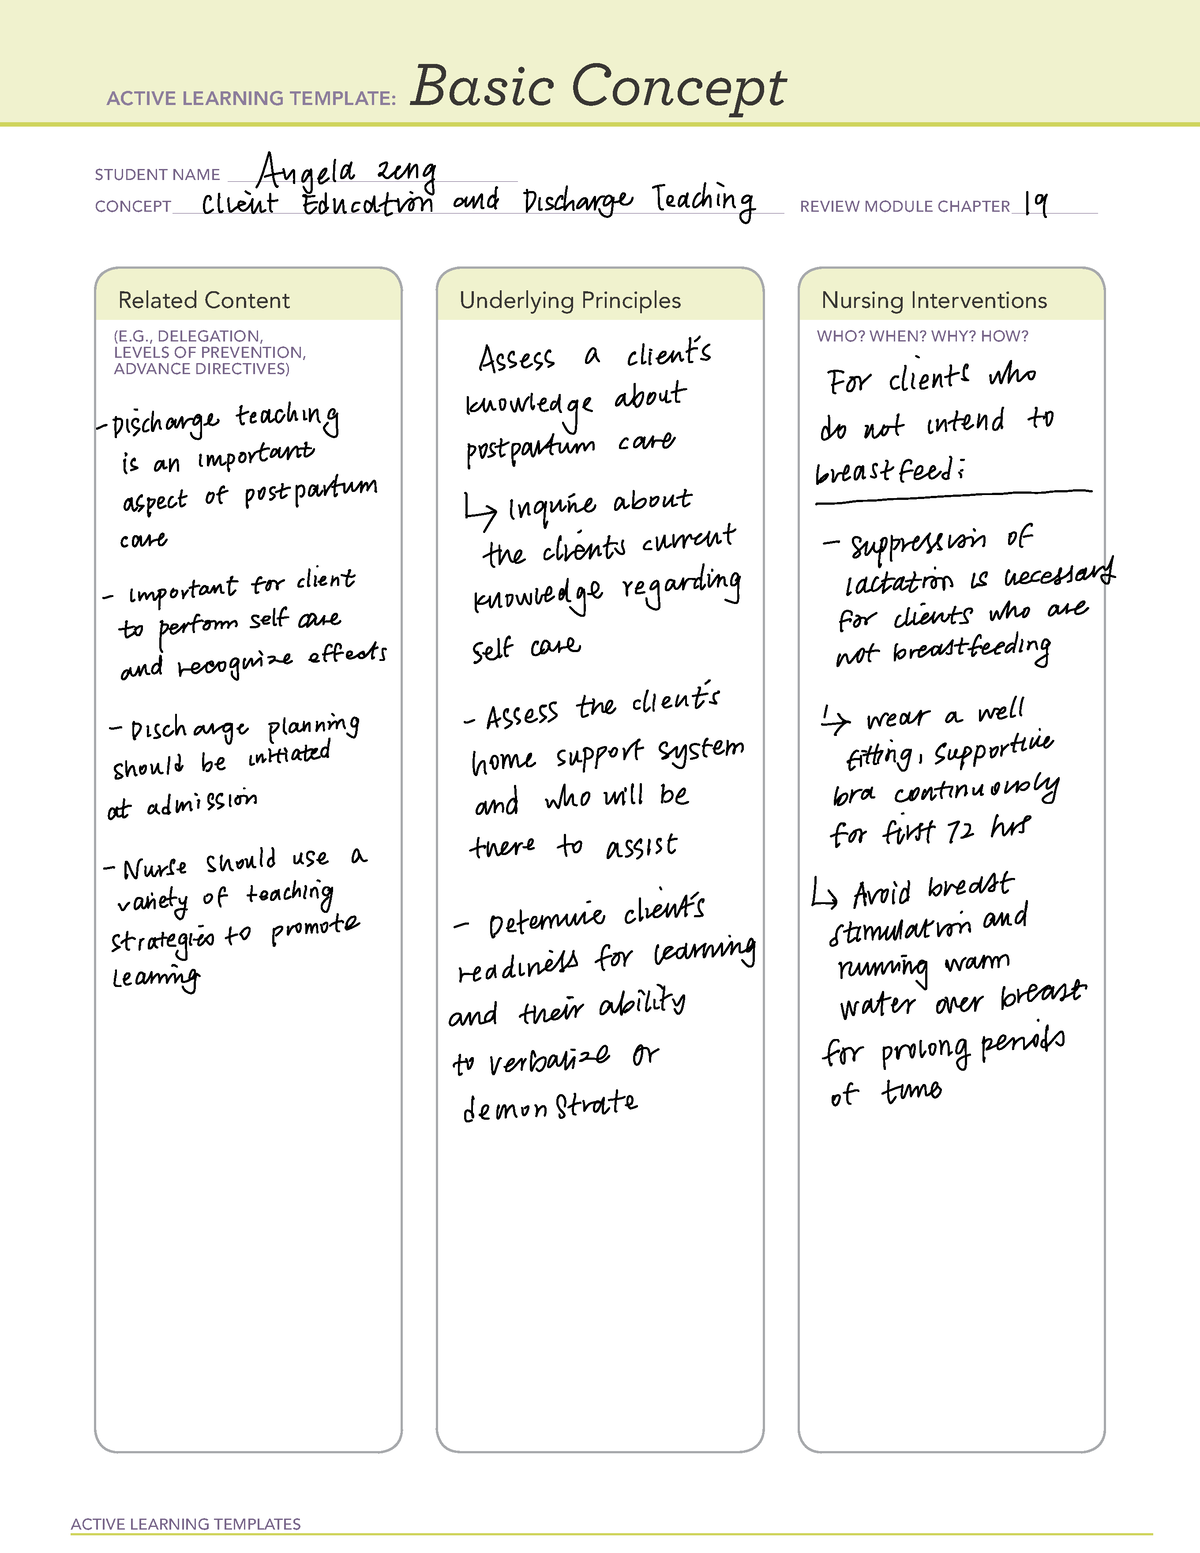 basic-concept-active-learning-template-1-nsrg-102-active-learning